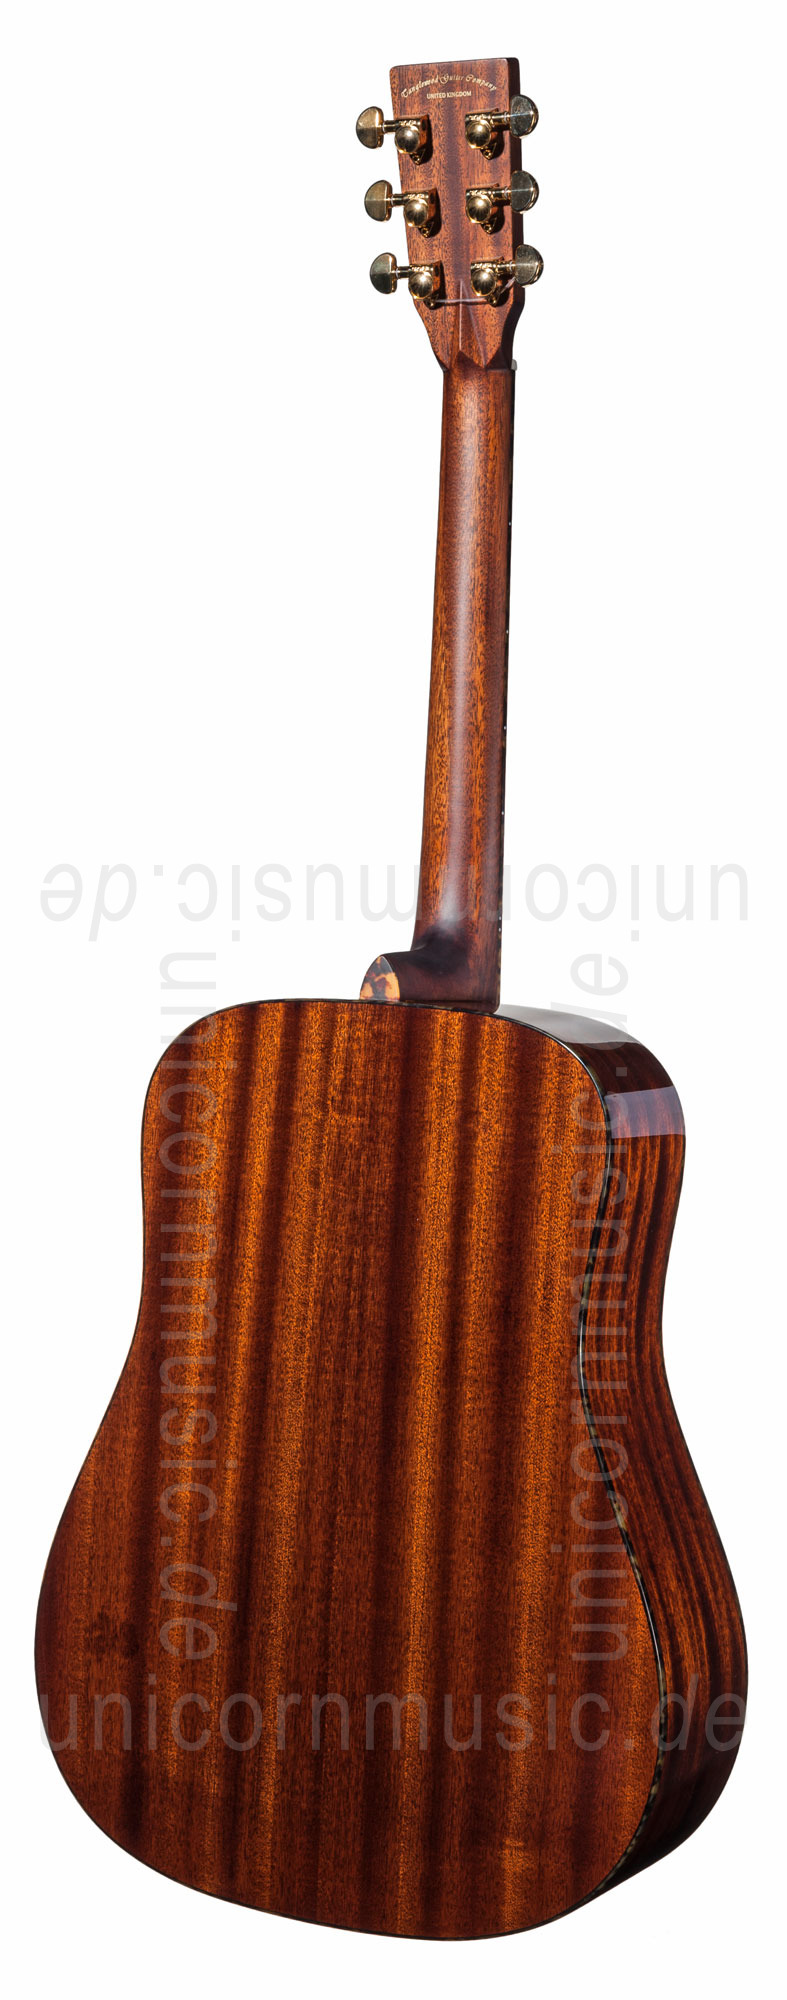 to article description / price Acoustic Guitar TANGLEWOOD TW15/ASM NAT  - Sundance Series - Mahagoni - Dreadnought - all solid